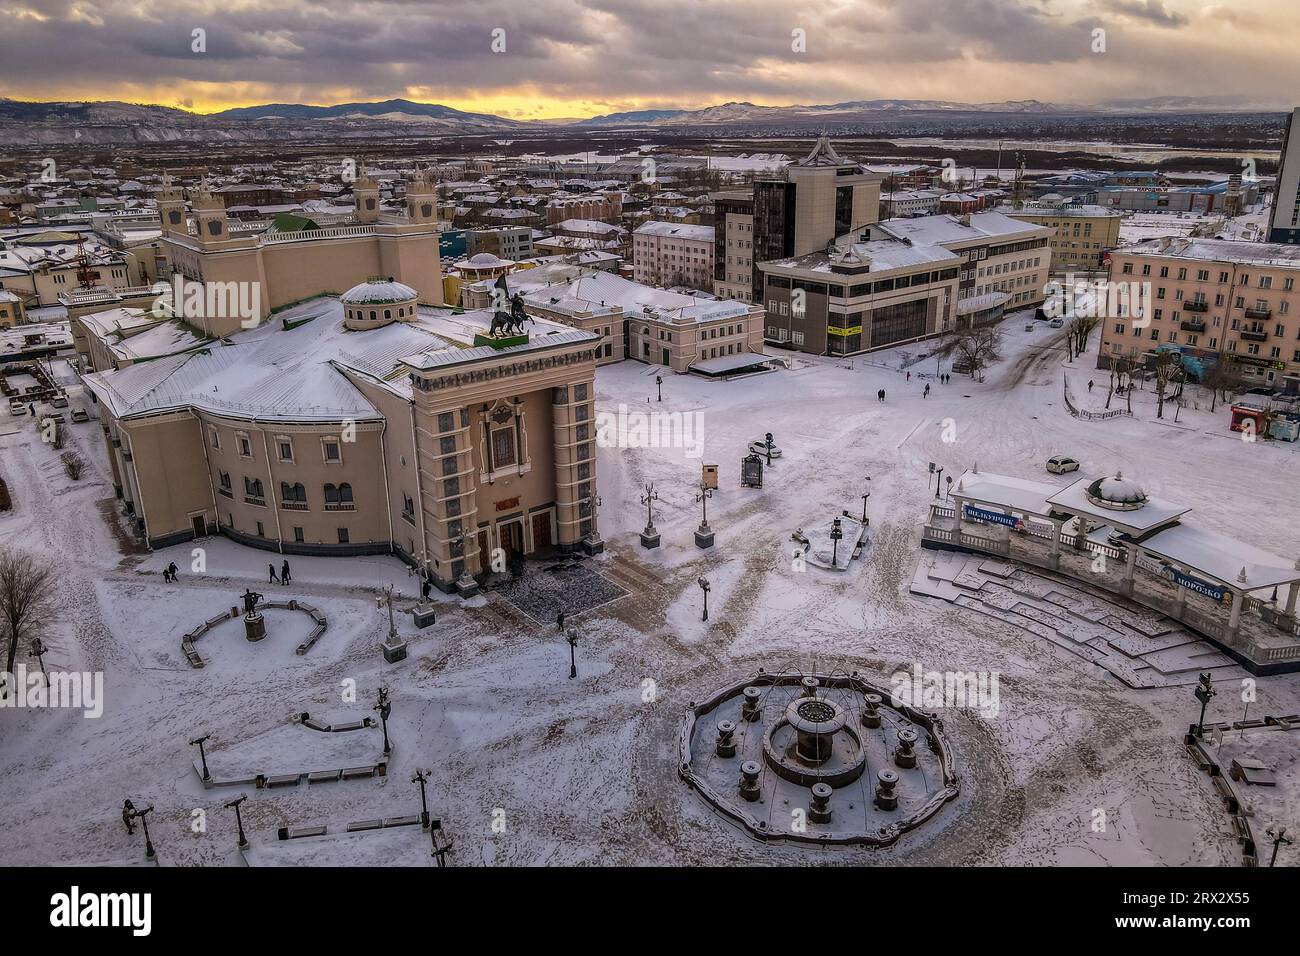 The downtown of the Siberian city of Ulan-Ude (Republic of Buryatiya, Russia), with the theater building, Soviet architecture, and city plaza Stock Photo